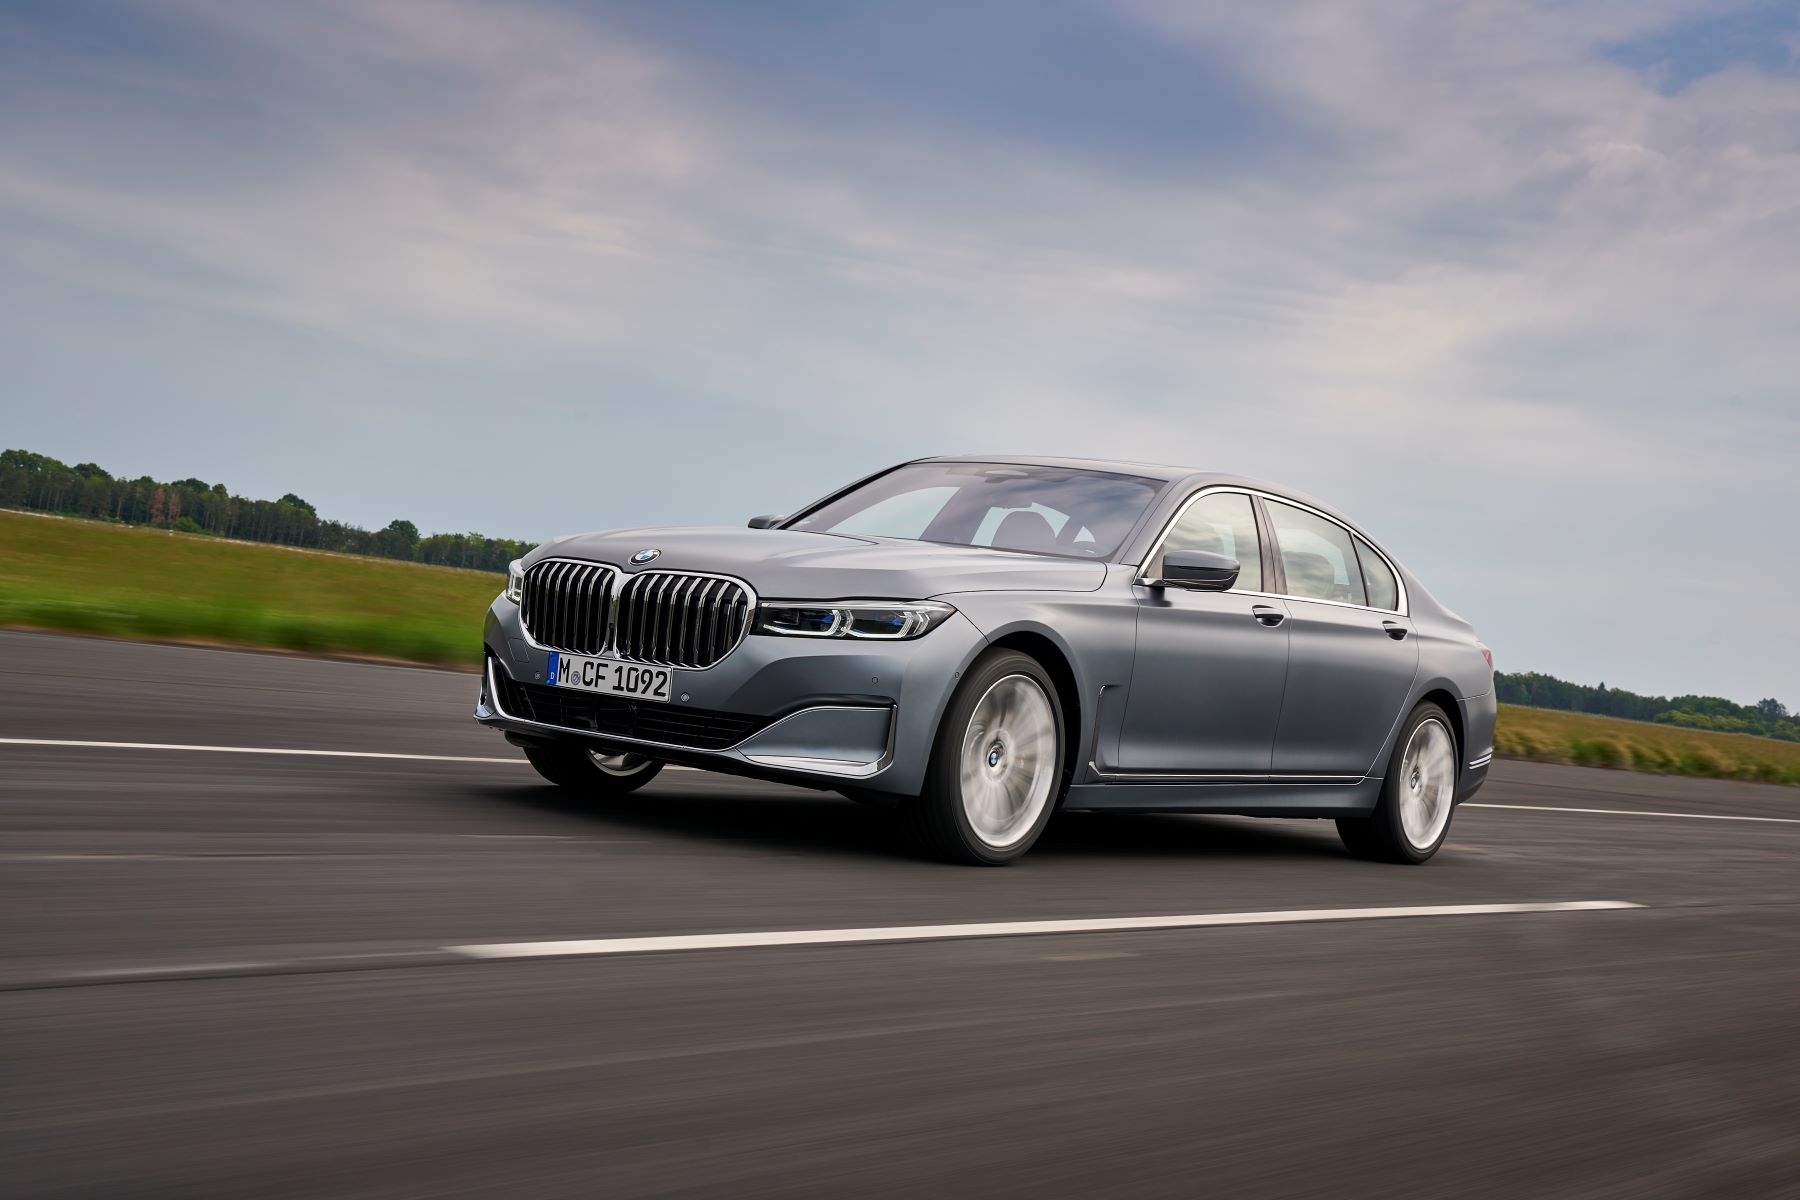 A silver-gray 2020 BMW 7 Series full-size luxury sedan model driving down a highway